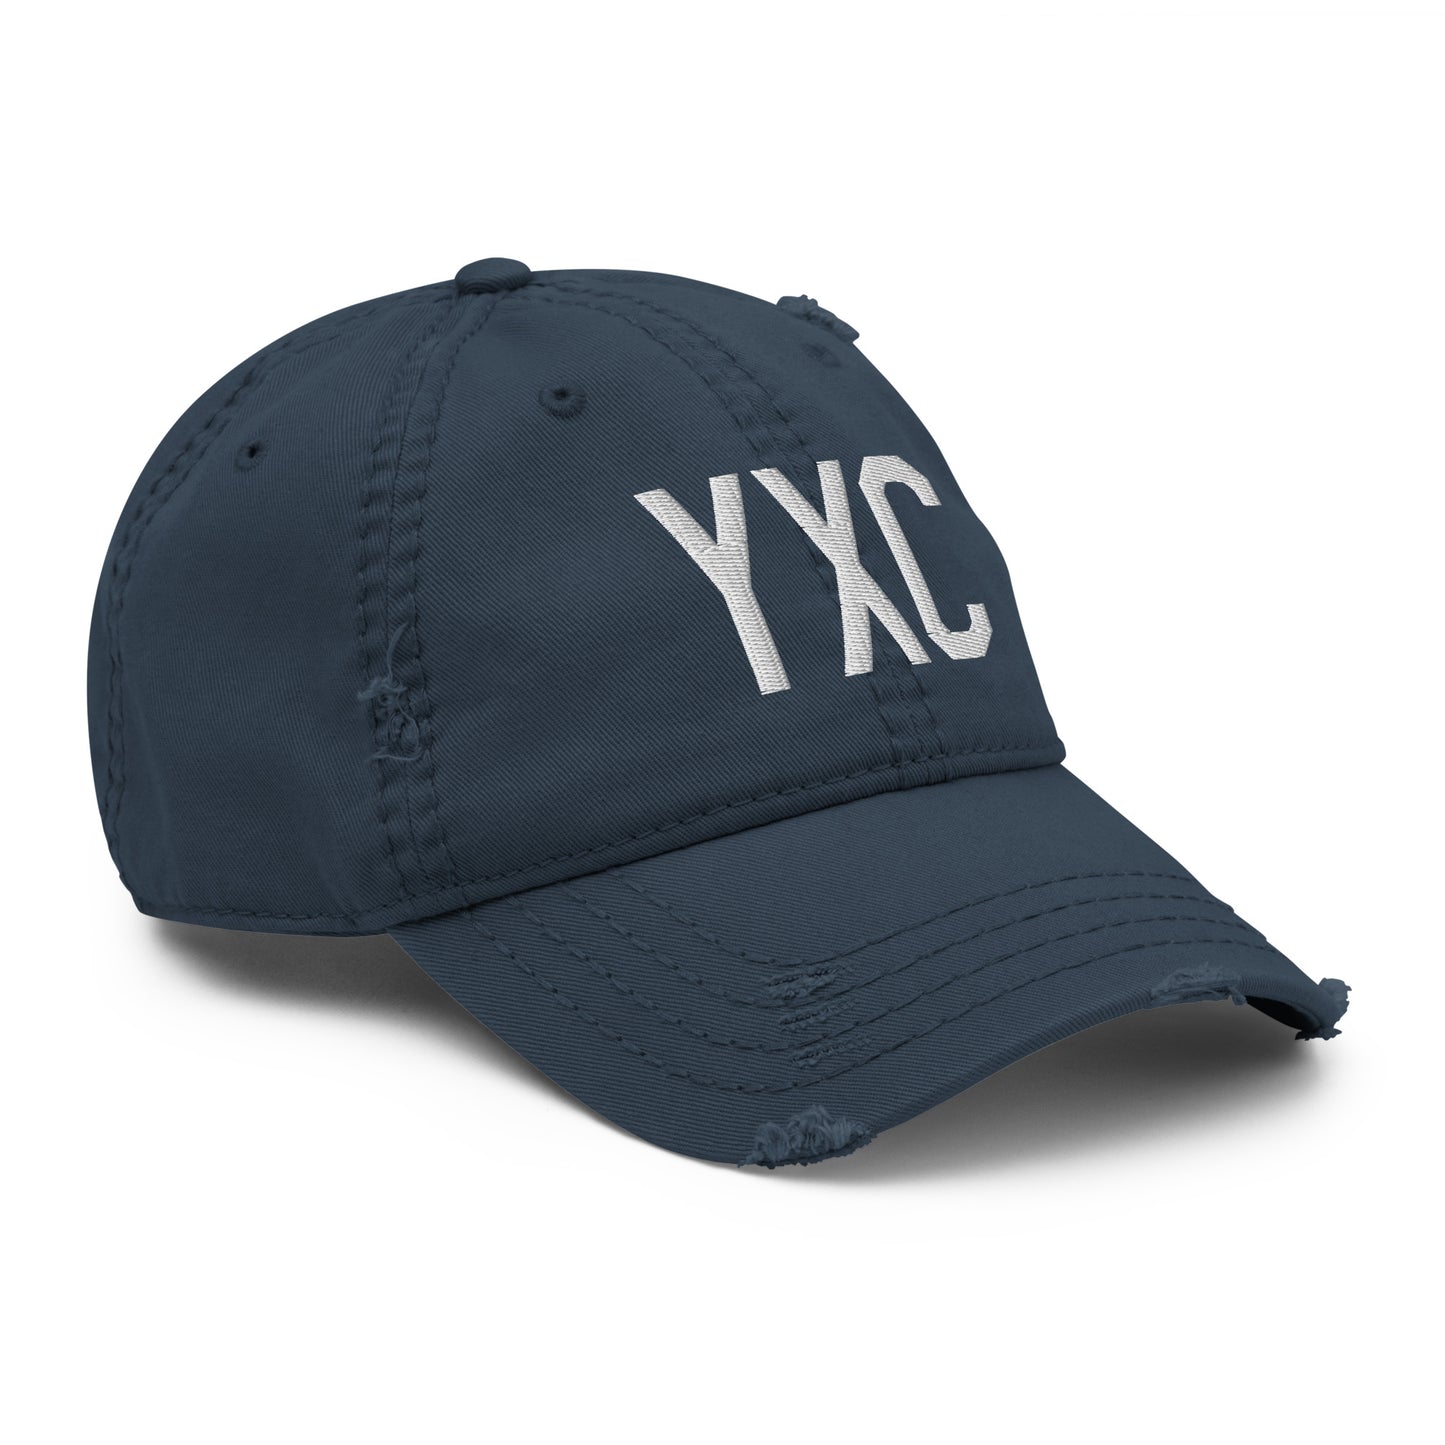 Airport Code Distressed Hat - White • YXC Cranbrook • YHM Designs - Image 14